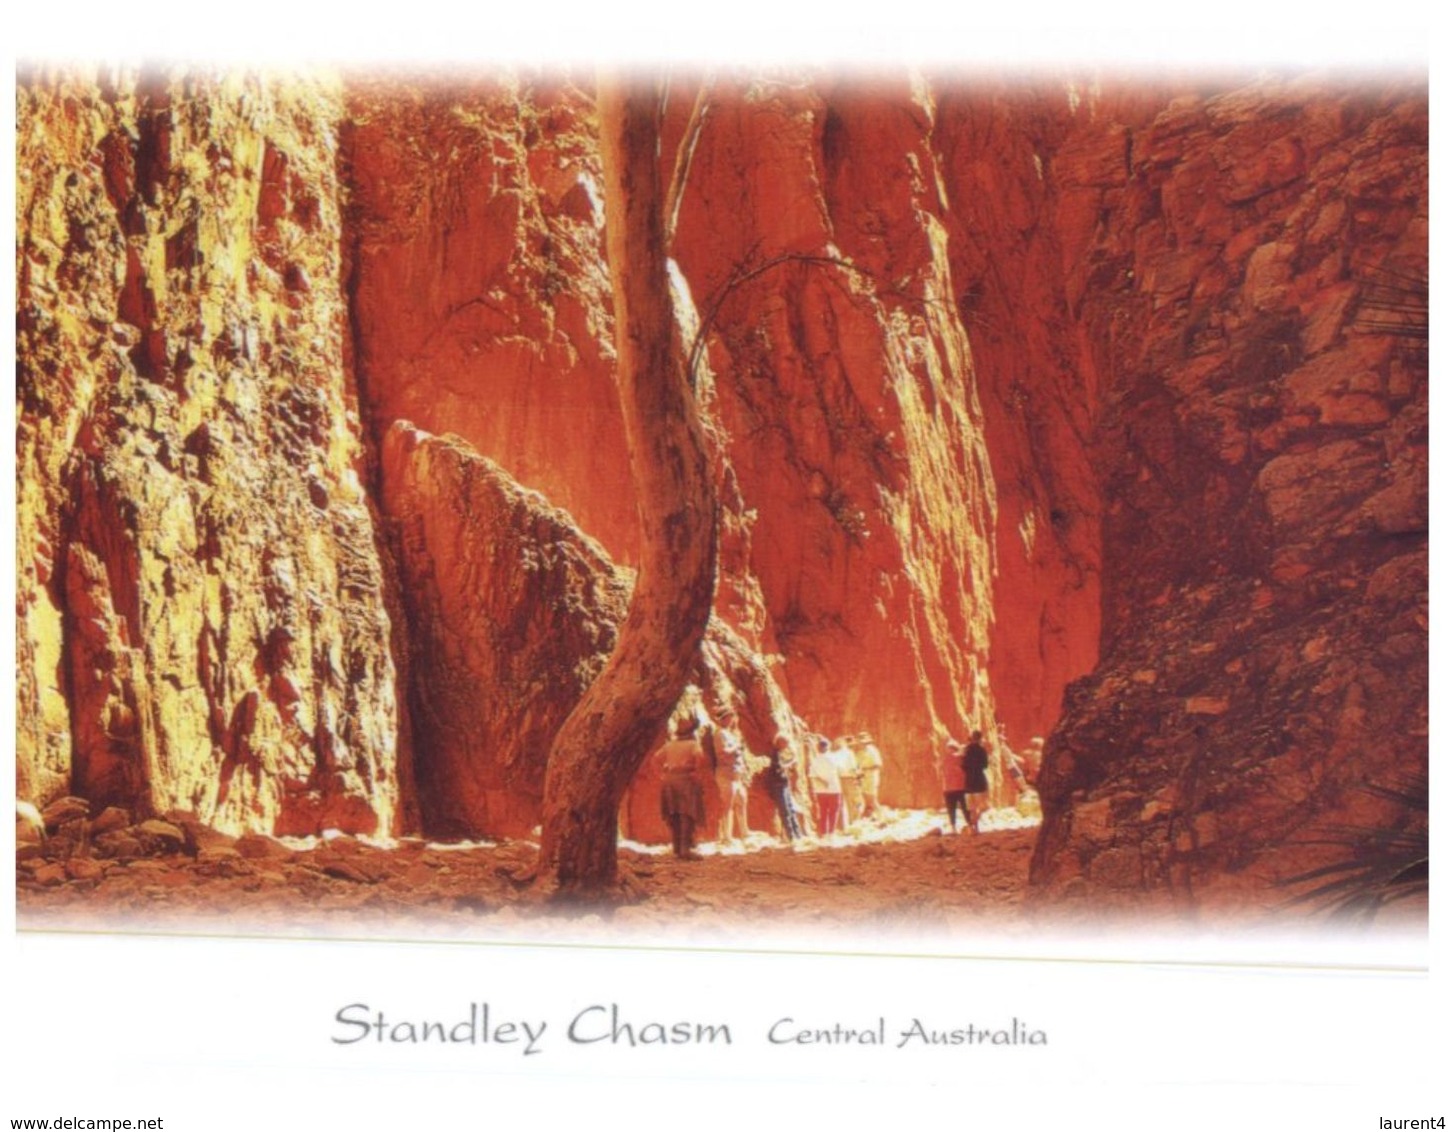 (400) Australia - NT - Standley Chasm - The Red Centre